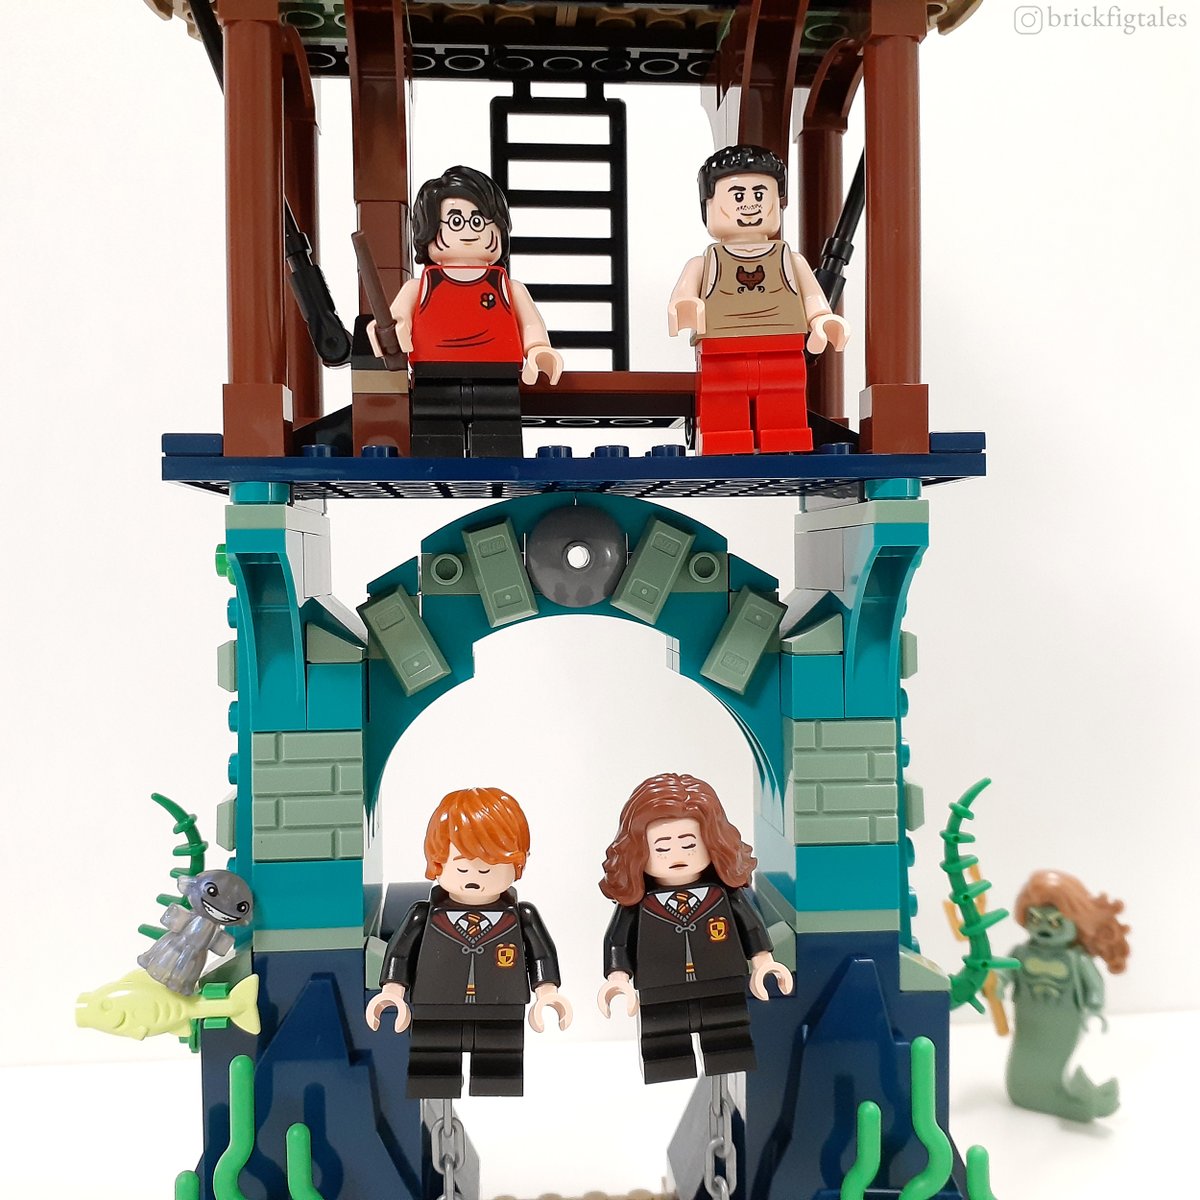 Triwizard Tournament: The Black Lake

Let the second task of the Triwizard Tournament begin! Photo of Harry and Viktor about to jump off the stands to go rescue Ron and Hermione from the Merpeople.

#LEGO #HarryPotter #RonWeasley #HermioneGranger #ViktorKrum #Hogwarts